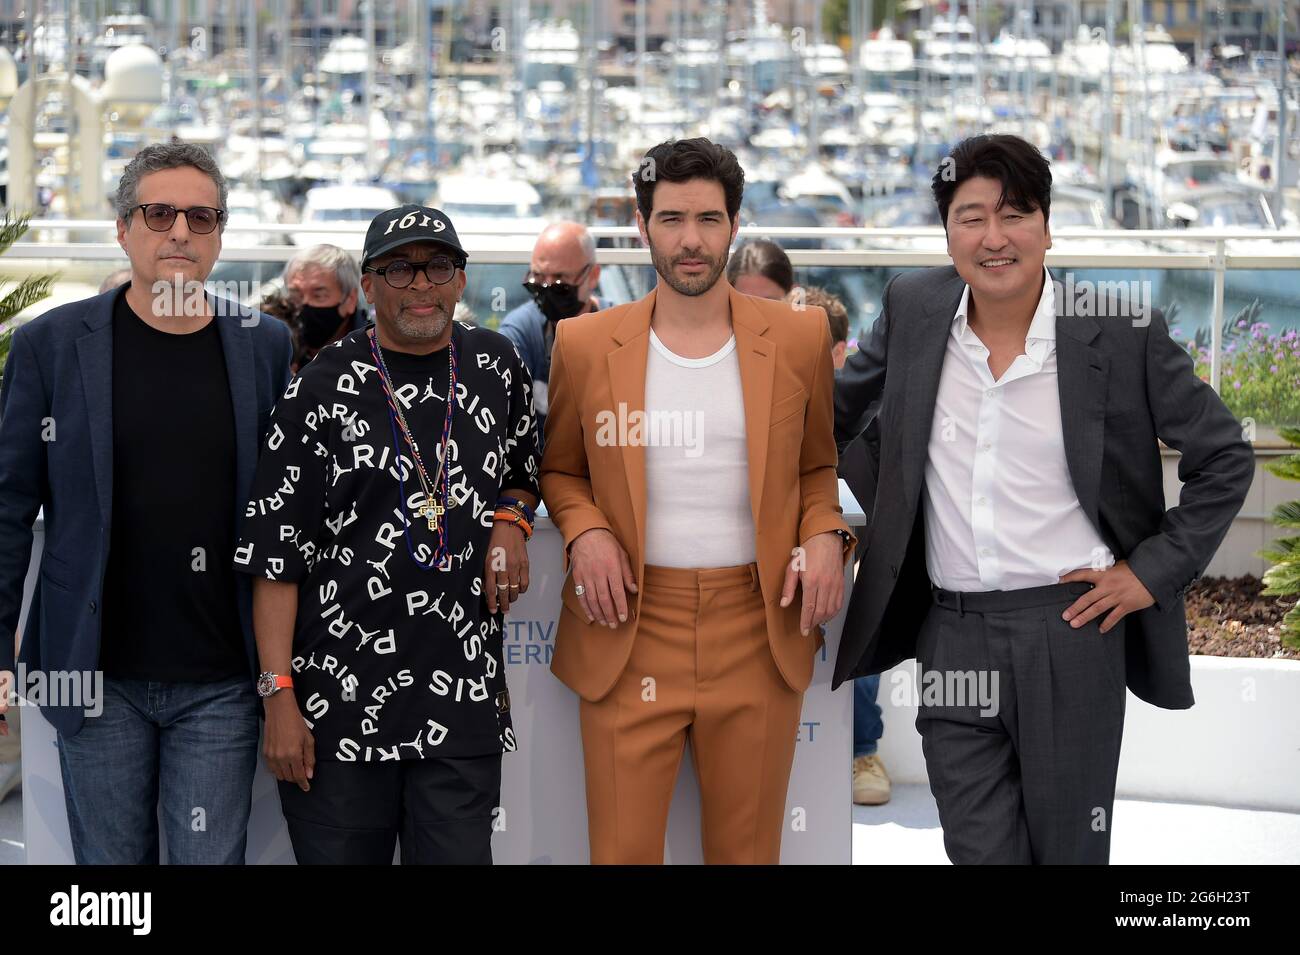 Cannes, France. 06th July, 2021. 74th Cannes Film Festival 2021, Photocall Jury Officiel du 74e Festival. Pictured: Spike Lee, Tahar Rahim, Song Kang-ho, Kleber Mendonca Filho Credit: Independent Photo Agency/Alamy Live News Stock Photo